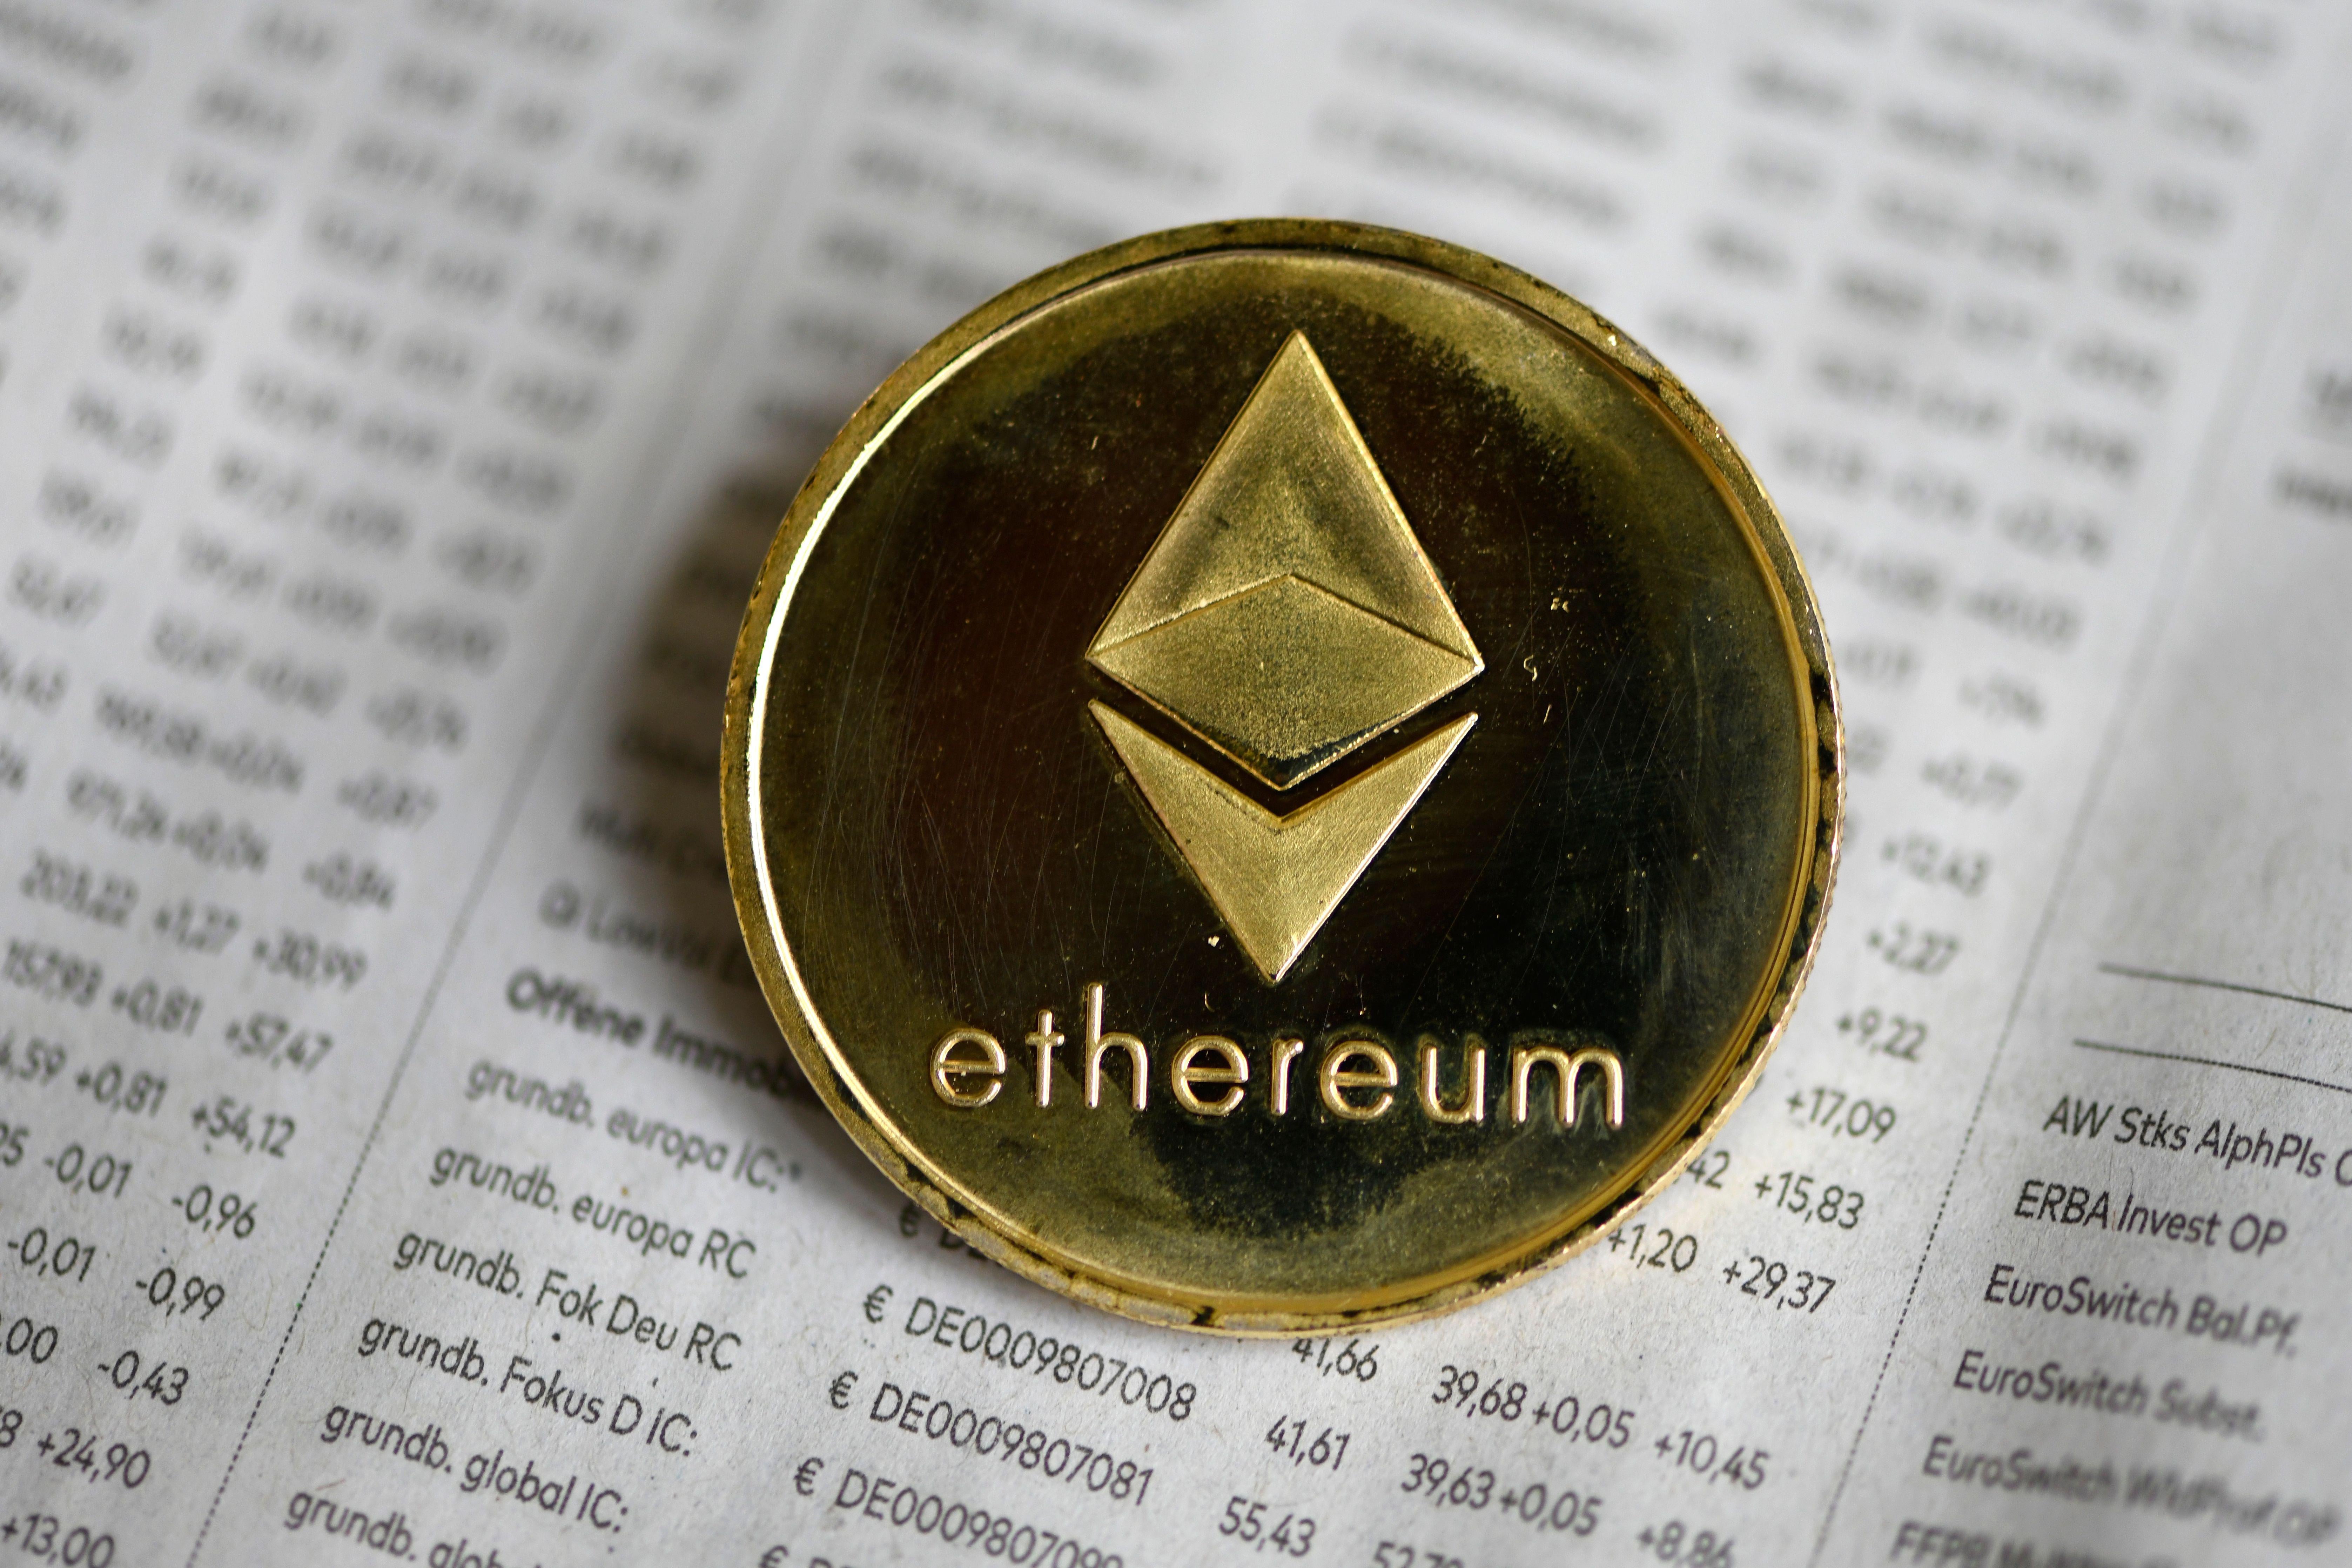 The photo shows a physical imitation of a Ethereum cryptocurrency token.